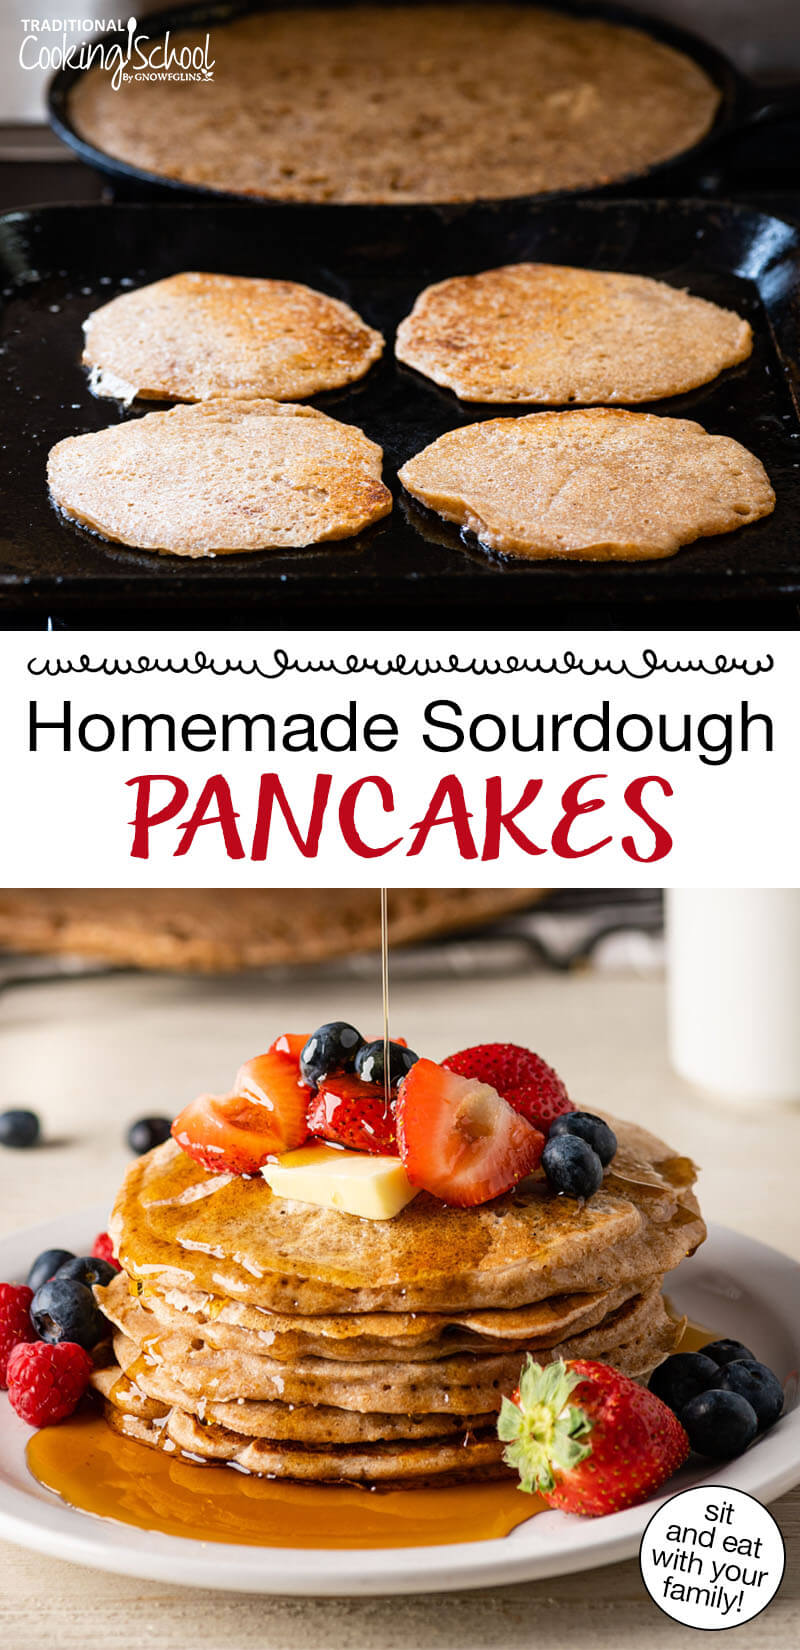 Photo collage of making sourdough pancakes on the griddle and skillet. One photo shows a stack of pancakes topped with fresh fruit and being drizzled with maple syrup. Text overlay says: "Homemade Sourdough Pancakes (sit and eat with your family!)"